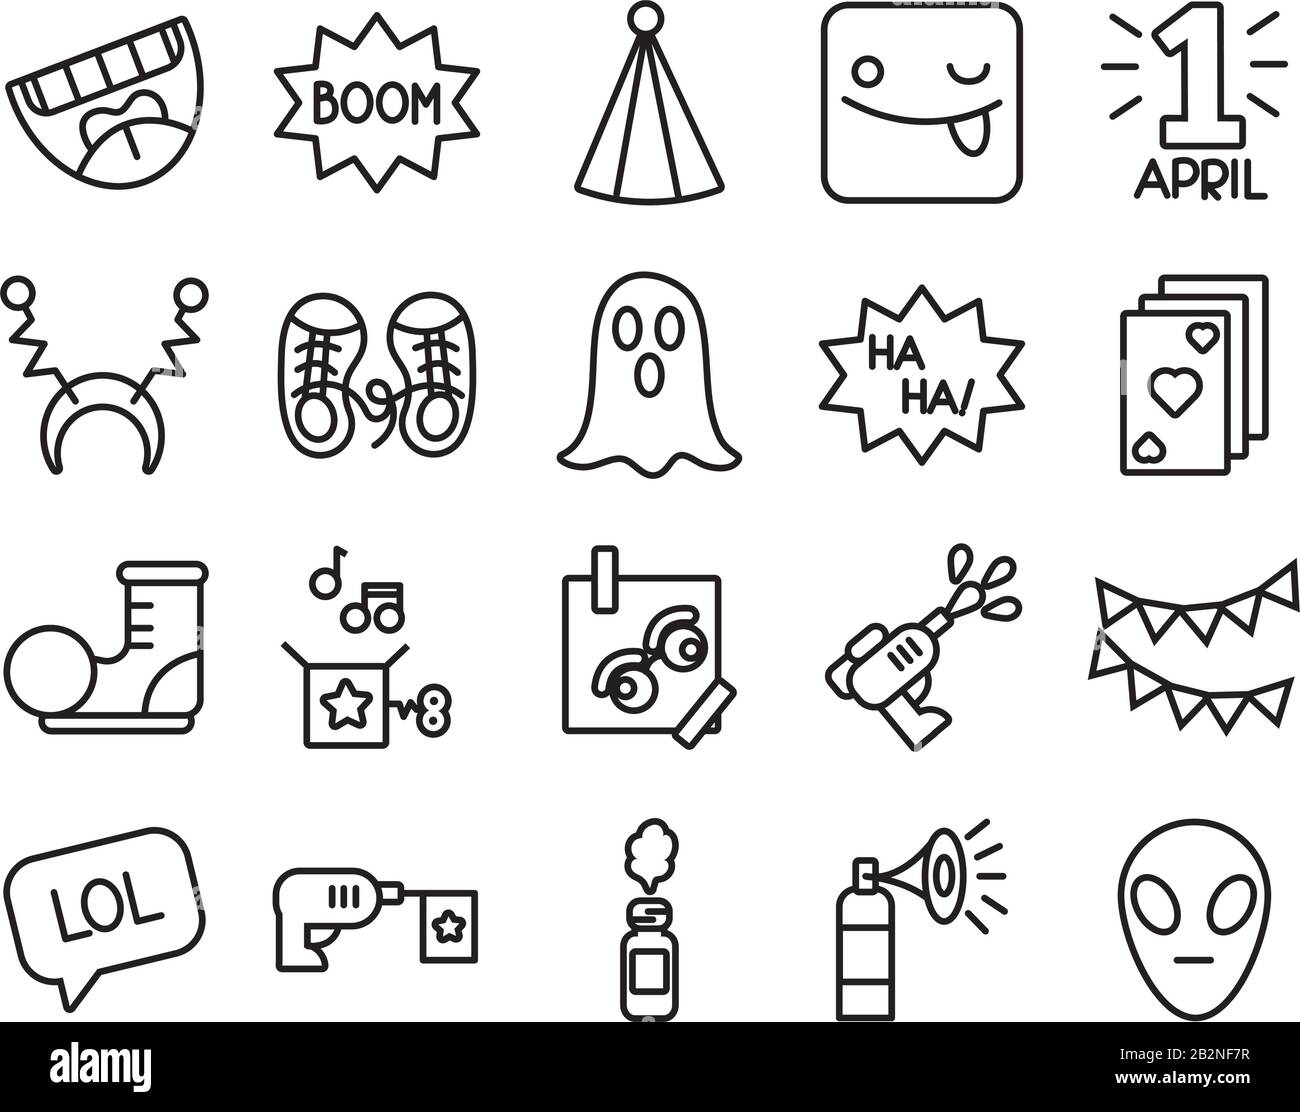 bundle of fools day set icons Stock Vector